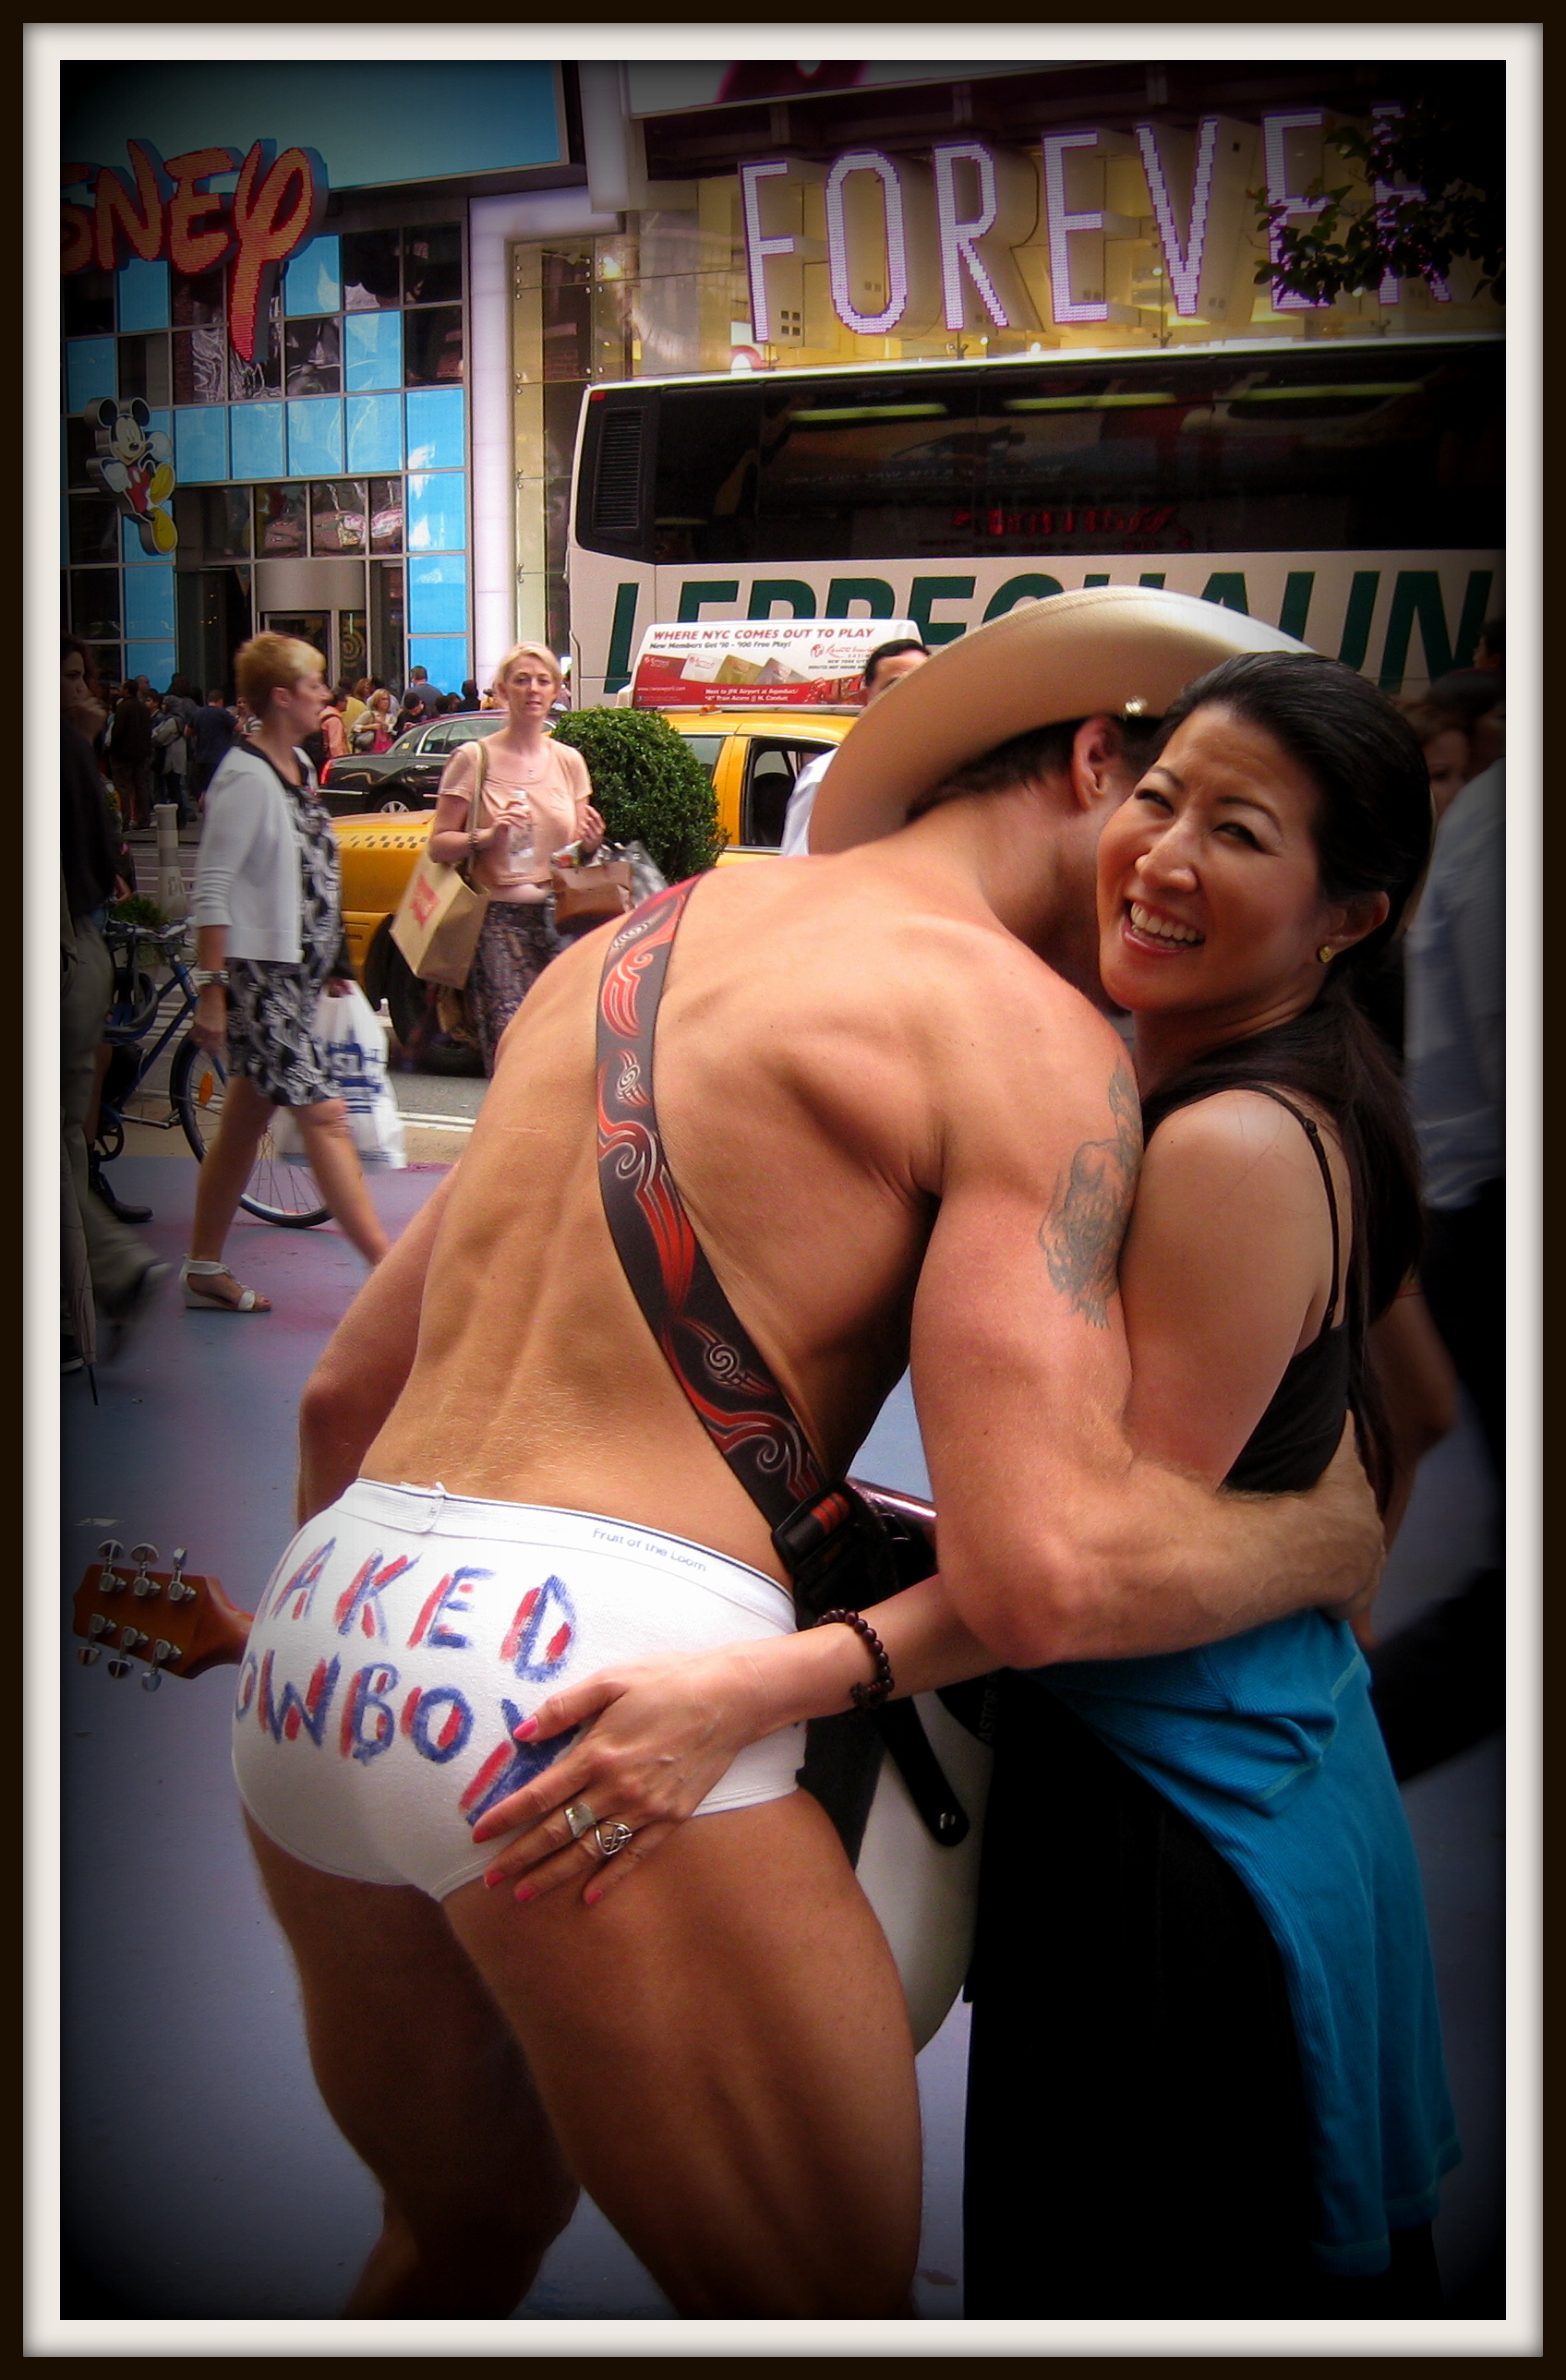 Lil Rhee with the Naked Cowboy, backside, in Times Square